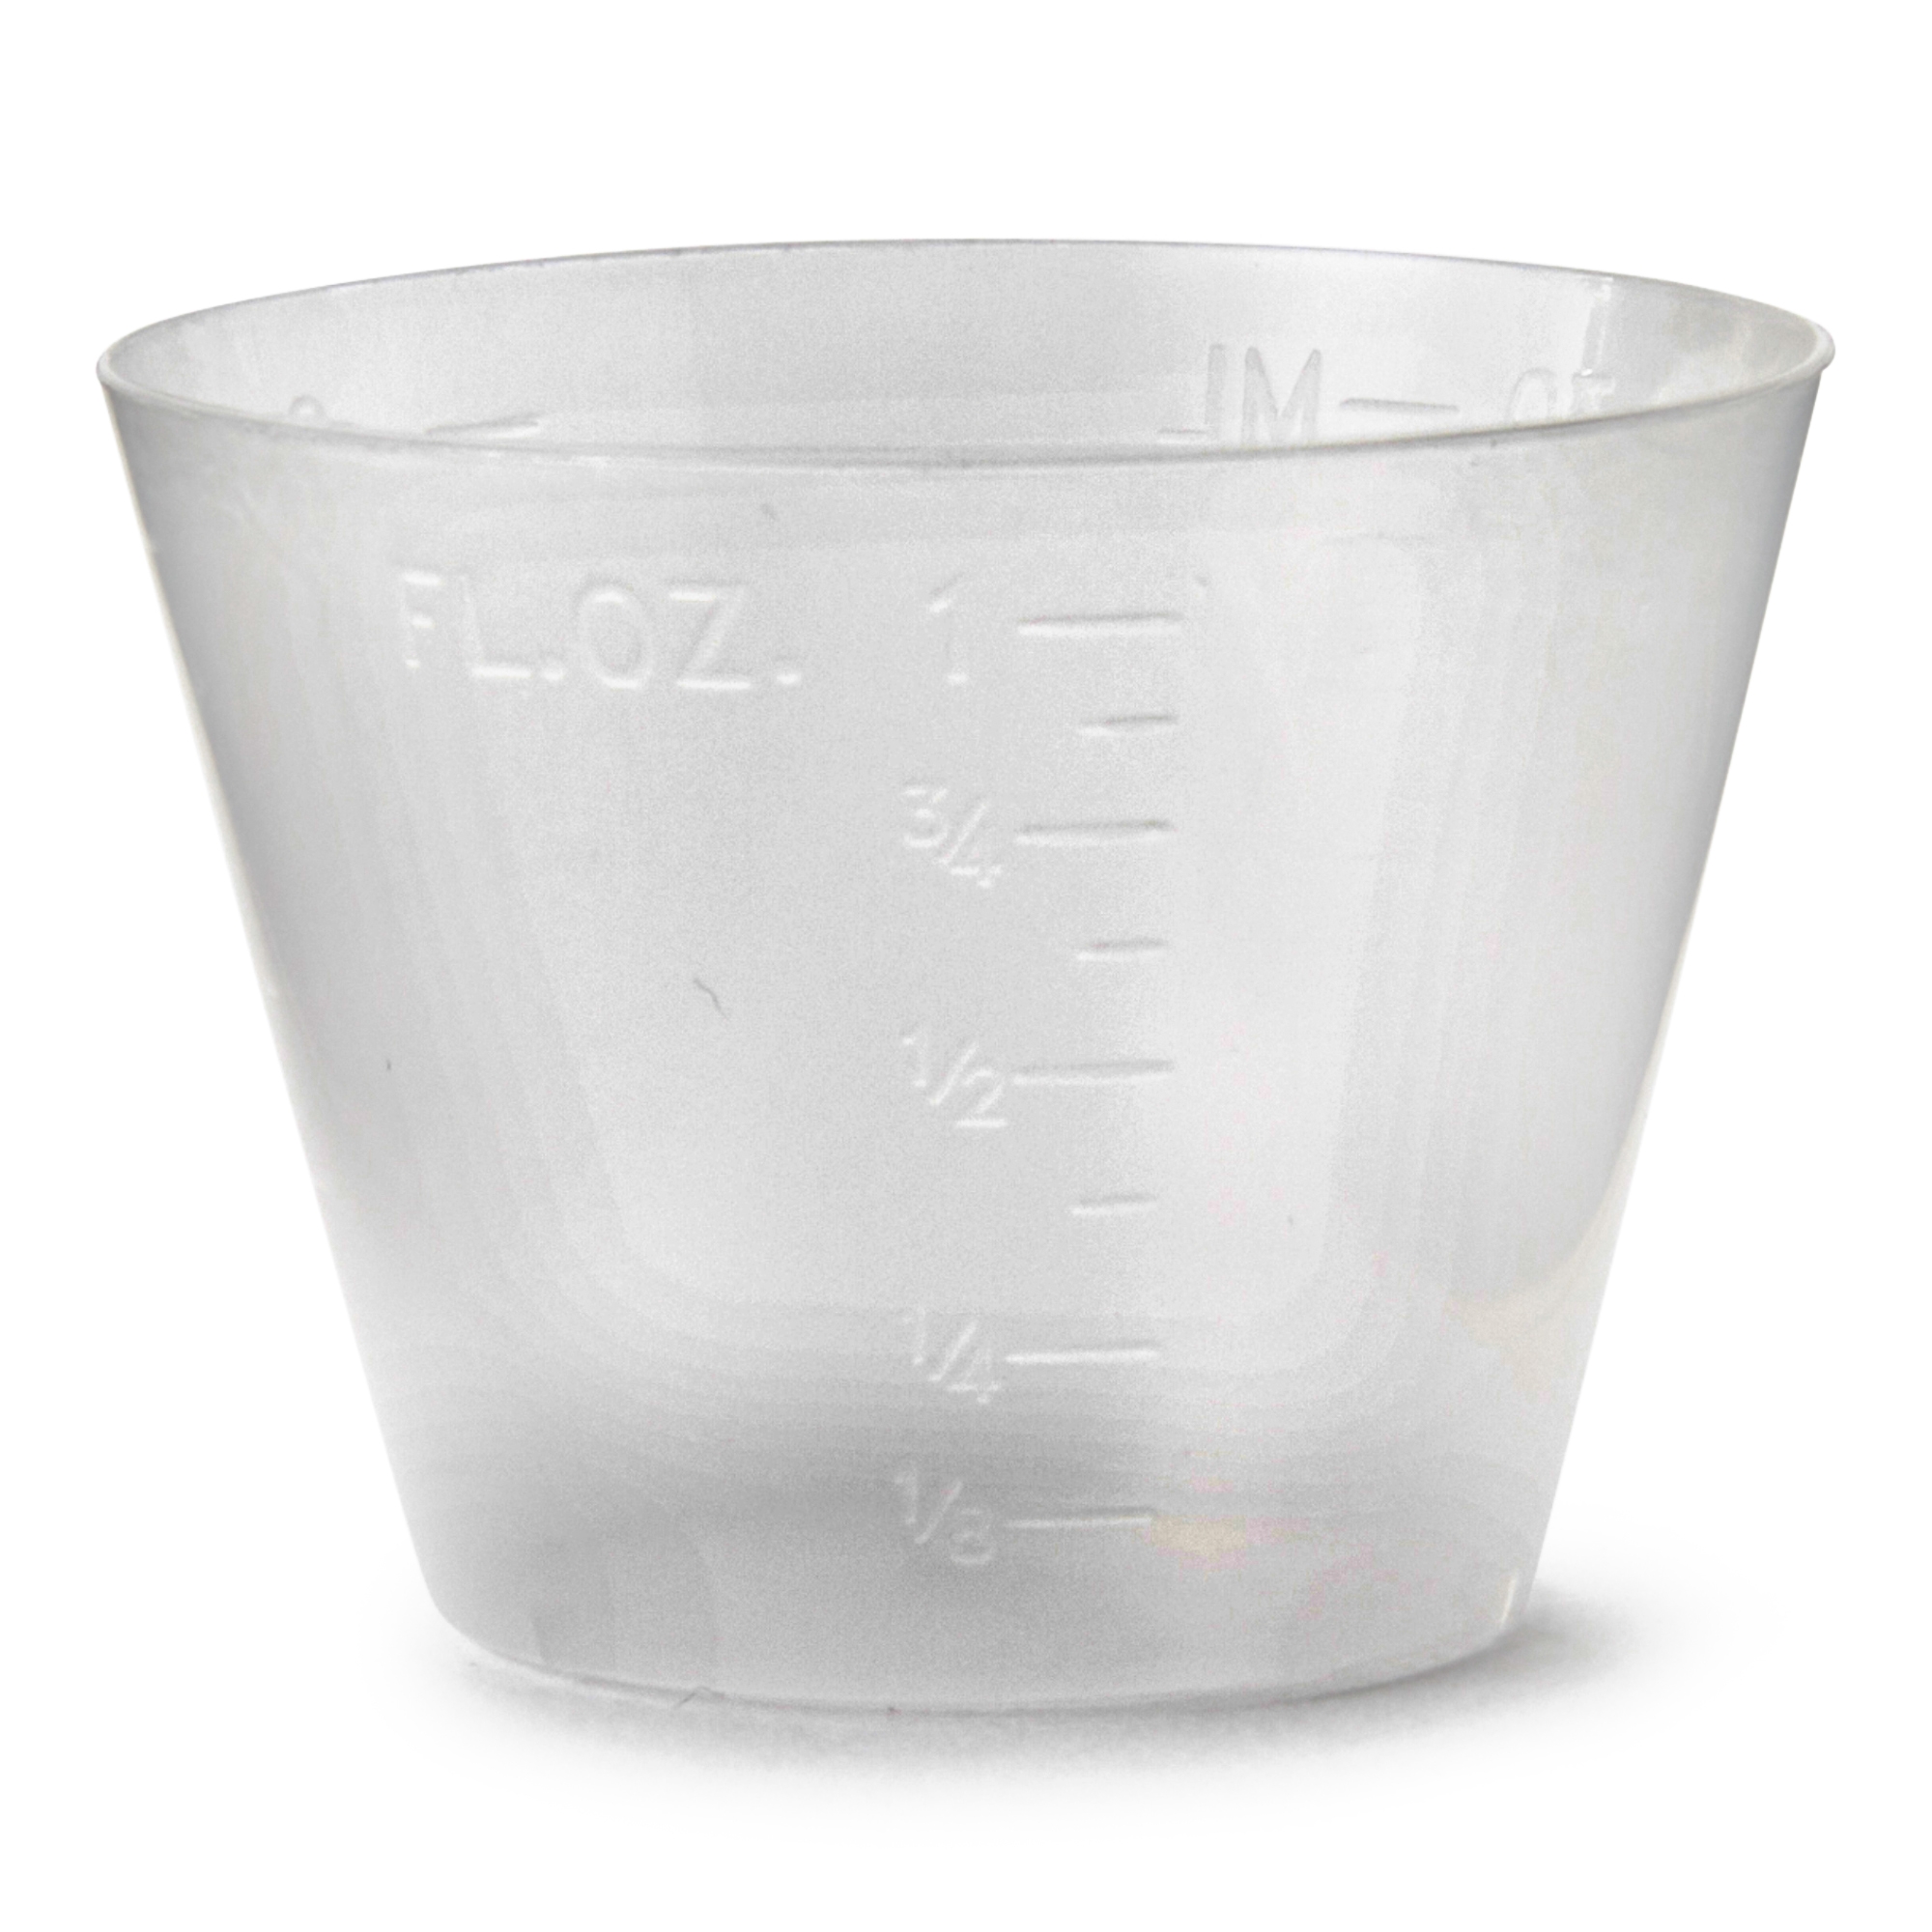 [5000 Pack] 1 oz Graduated Medicine Cups – Polypropylene Disposable  Measuring Cup - Clear Plastic Cups with ML, Dram, CC, TBSP & FL OZ Measure